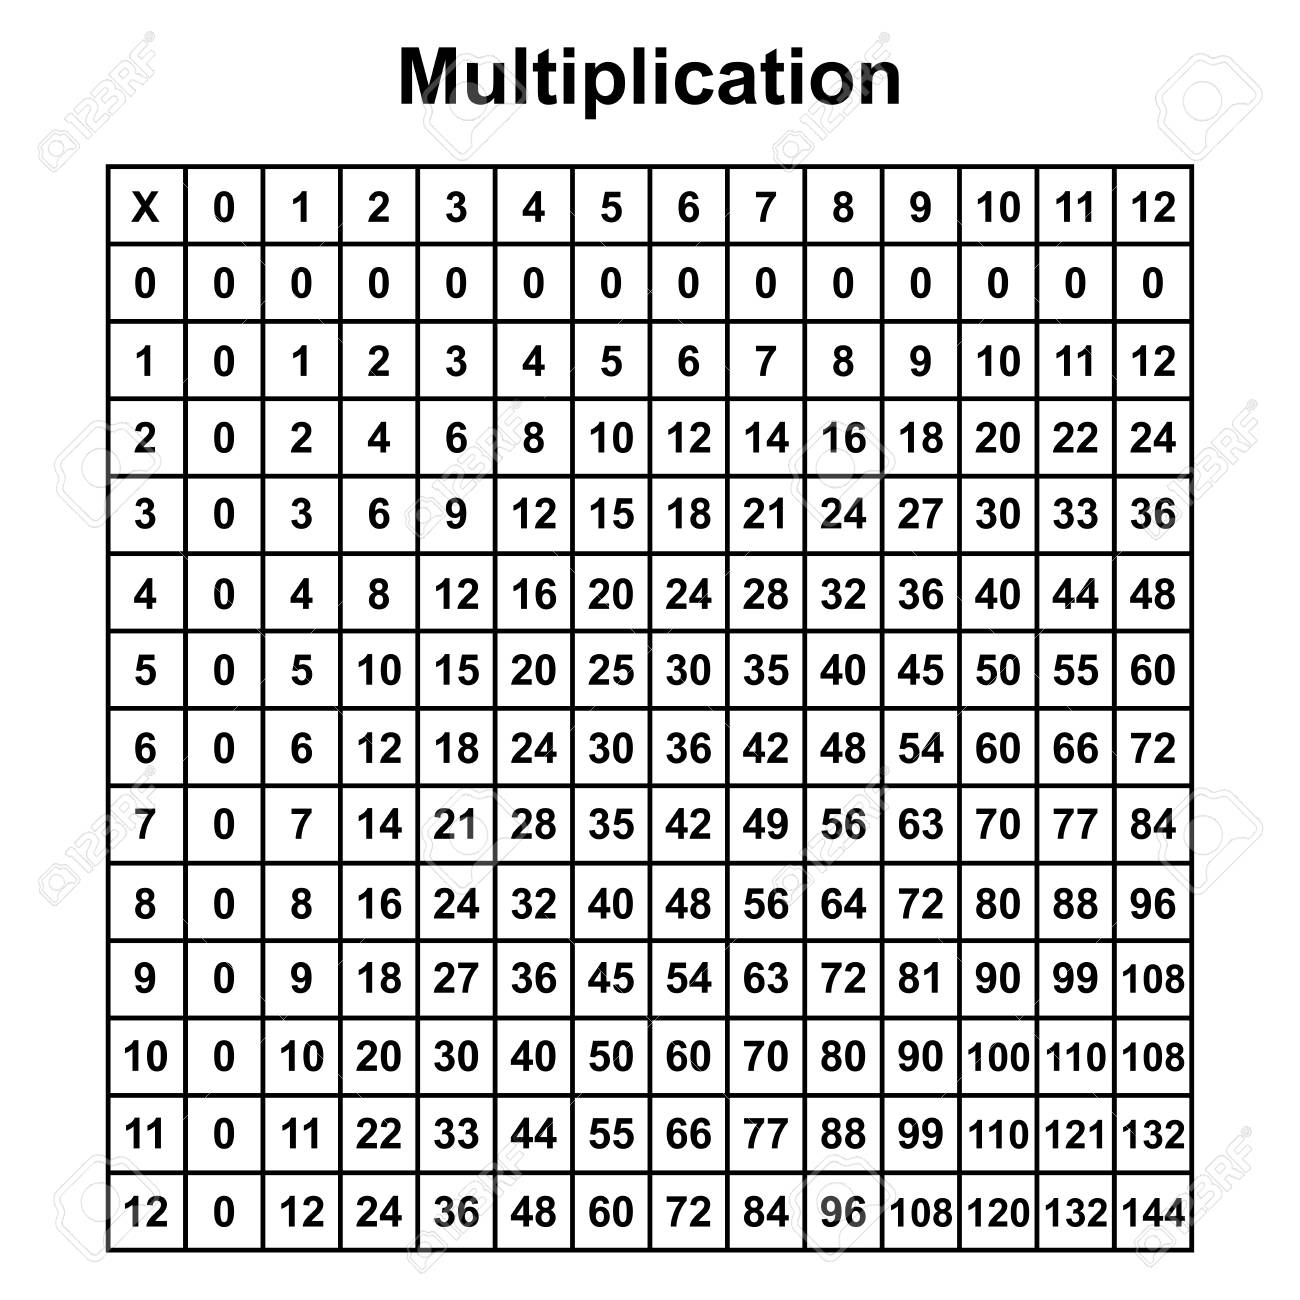 Multiplication Table Chart Or Multiplication Table Printable.. throughout Printable Multiplication